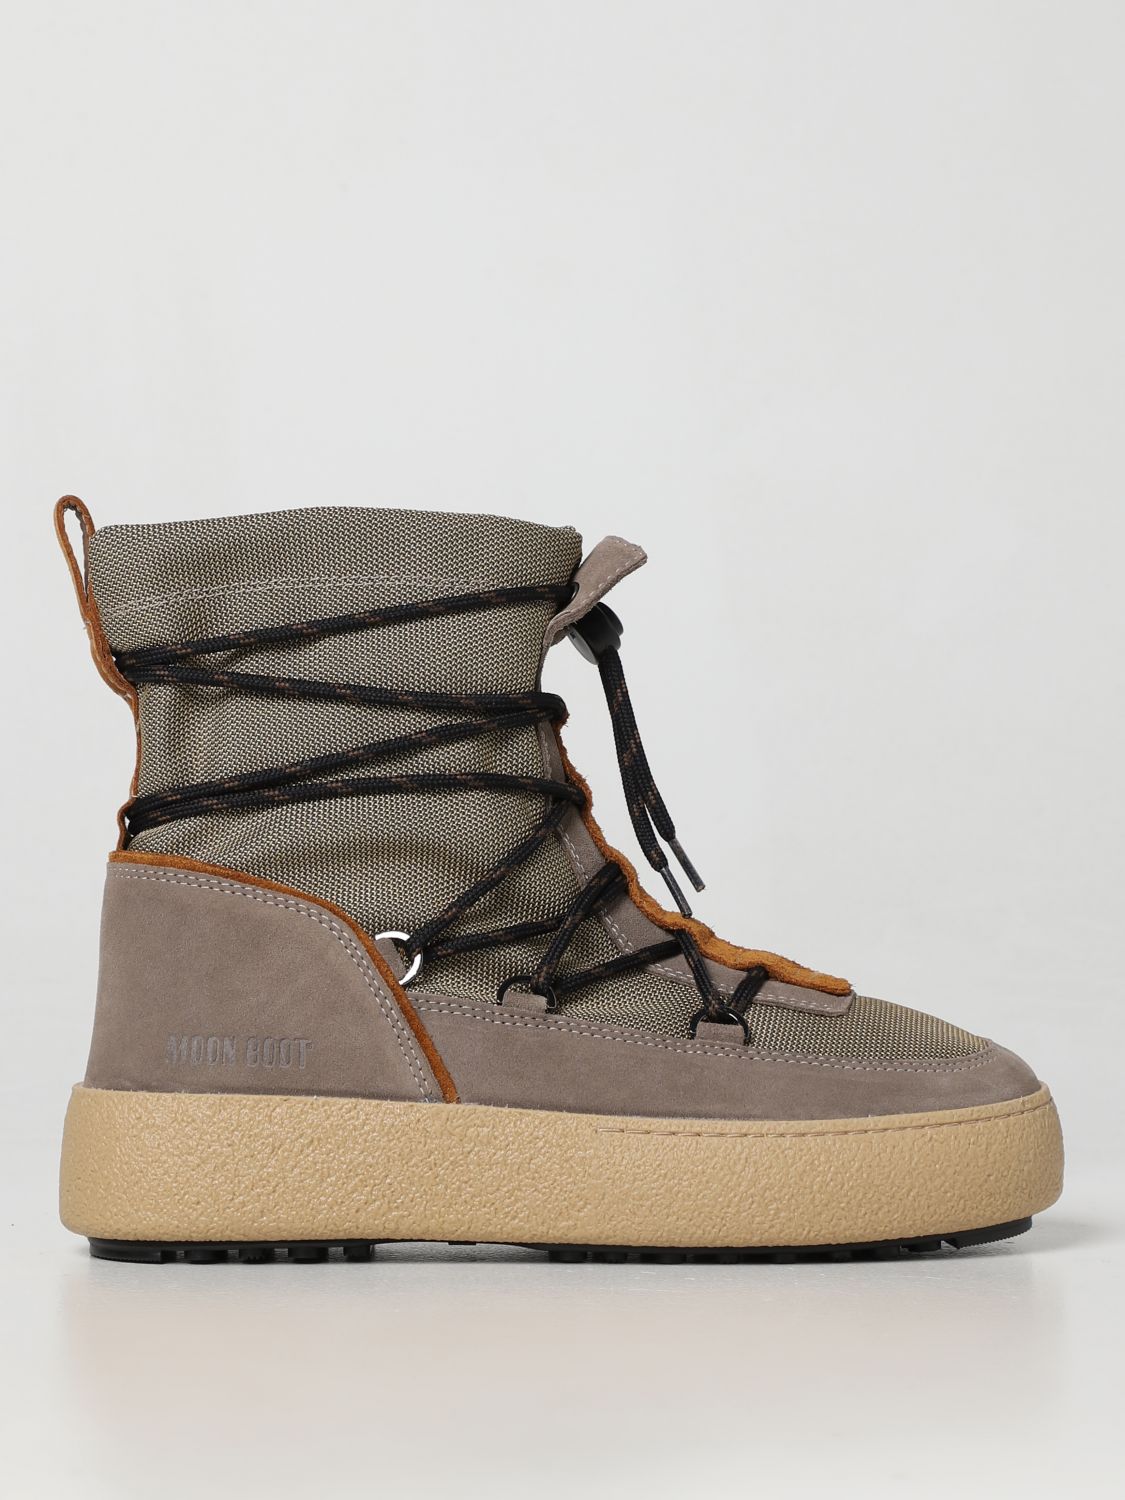 MOON BOOT: boots for man - Beige | Moon Boot boots 24400300 online on ...